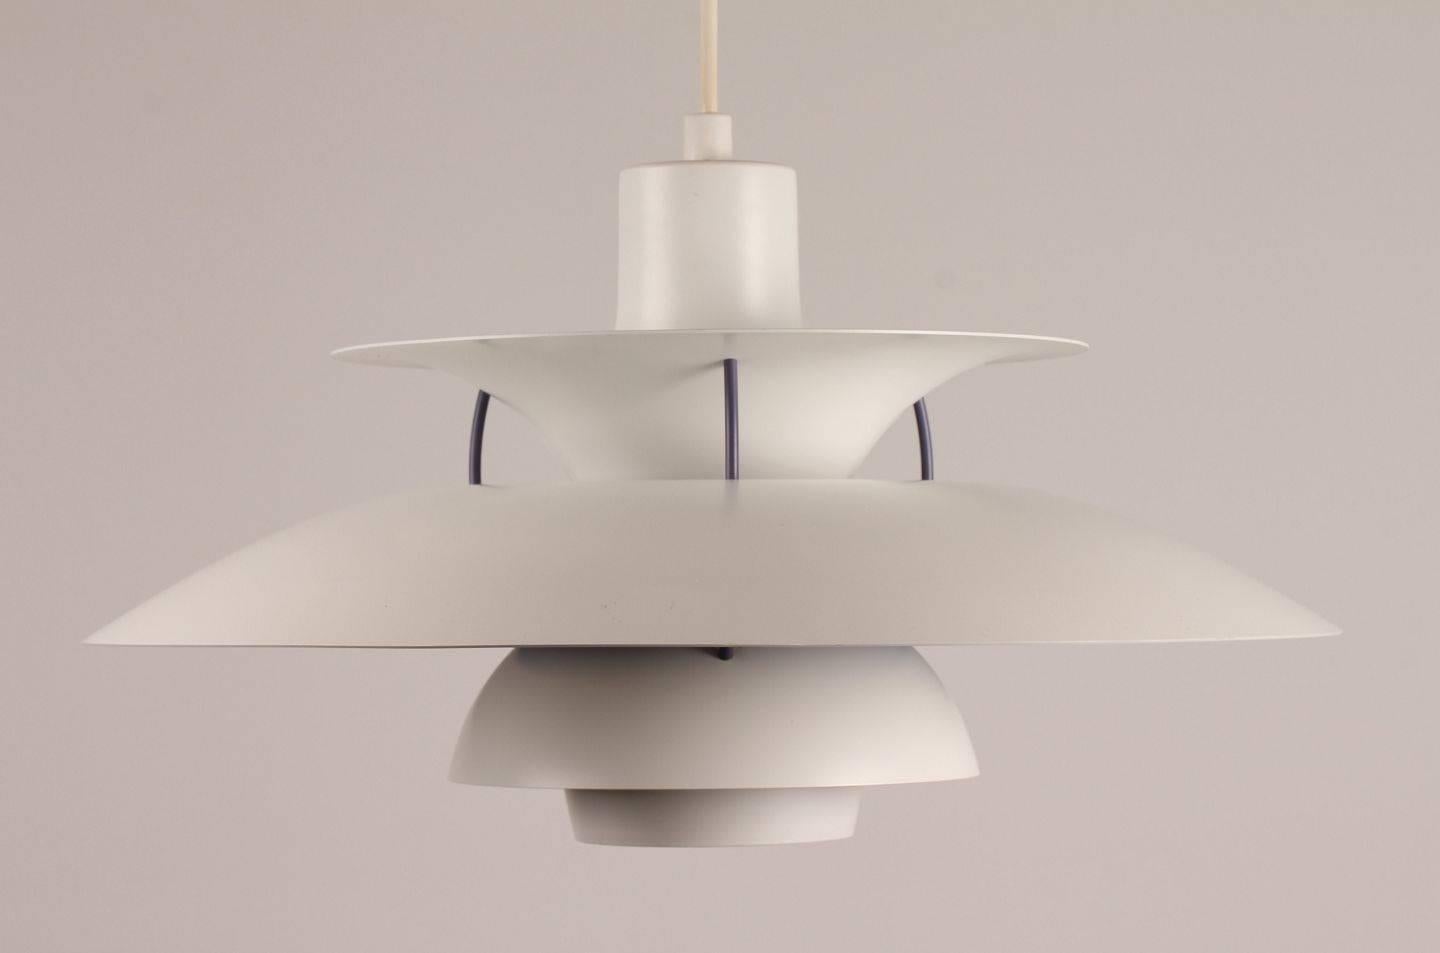 The 'PH 5' pendant was designed by Poul Henningsen and produced in Denmark by Louis Poulsen during the 1960s. A Danish Classic who has hung in most Danish homes in the 1960s.

The pendant is made from white-lacquered metal and is in a very good